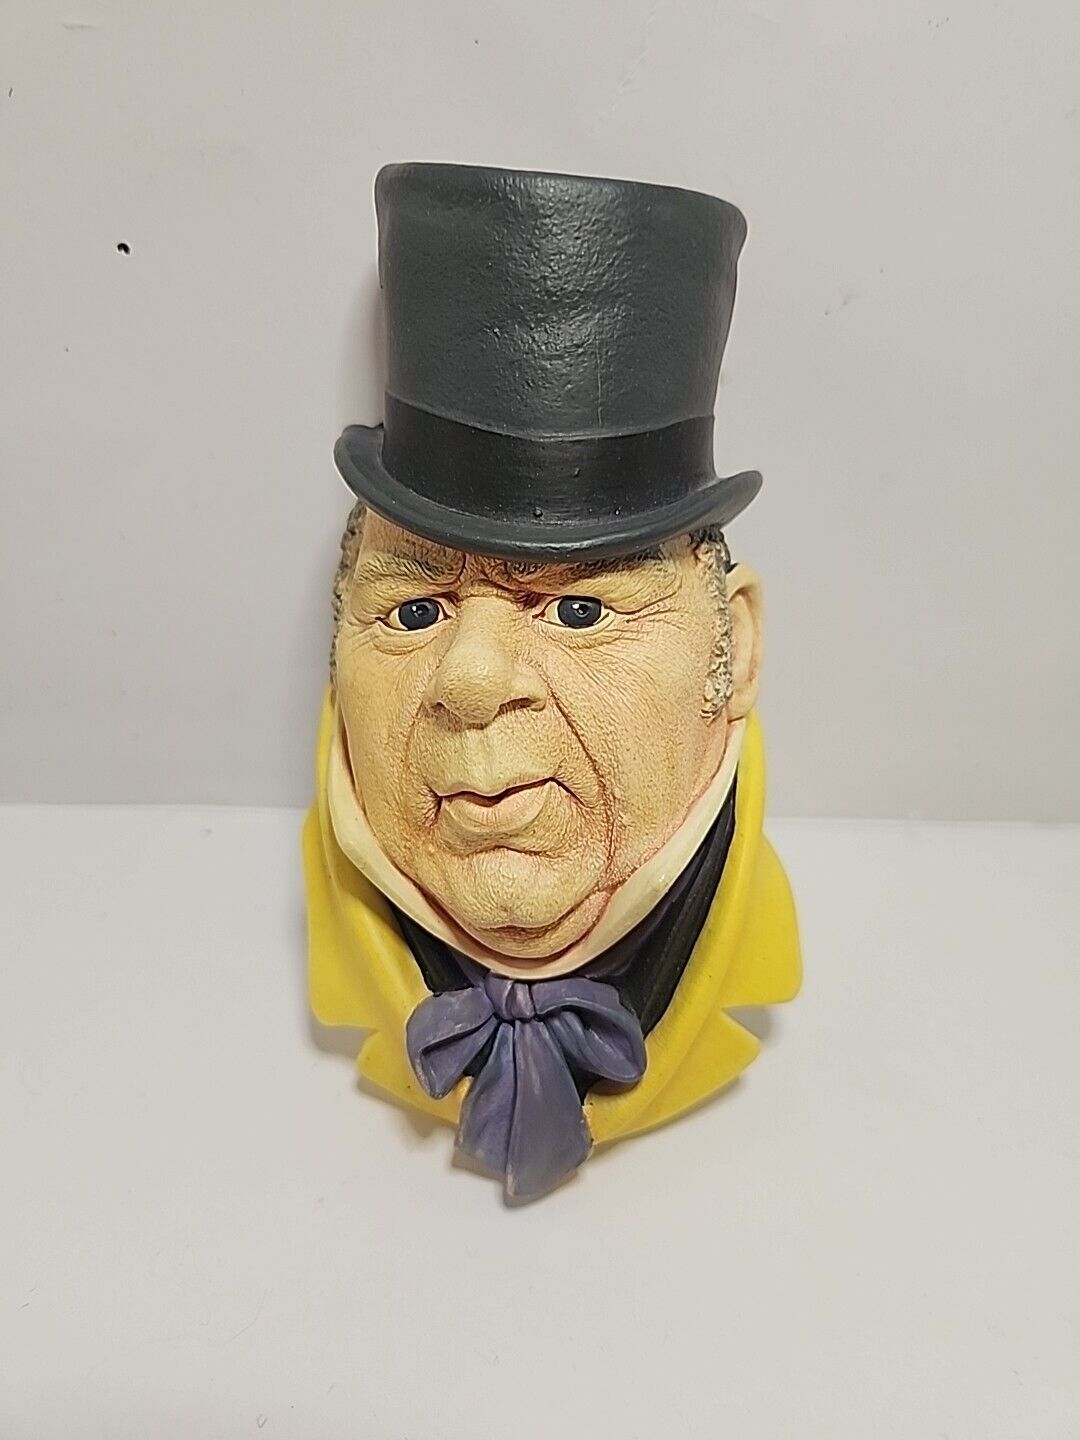 Vtg 1964 Bossons England Mr Micawber Chalkware Head Wall Hanging Charles Dickens